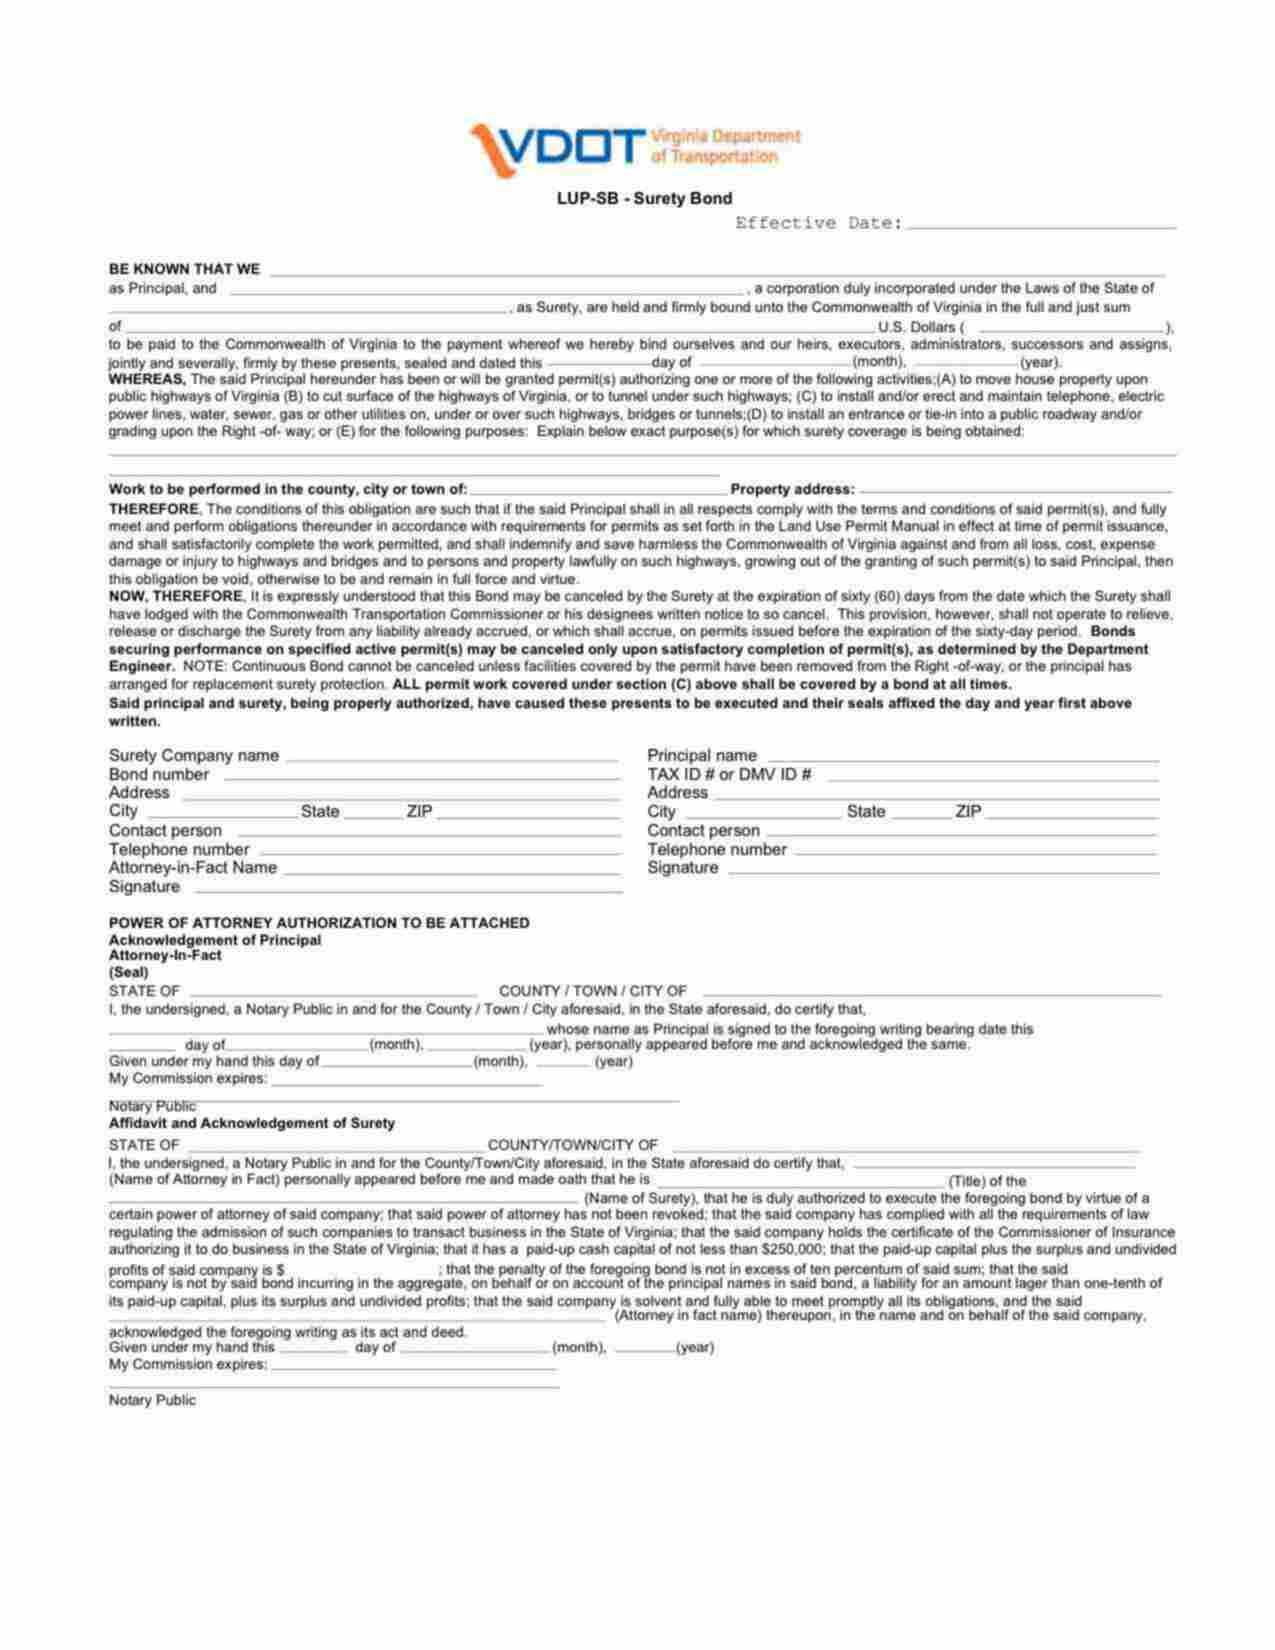 Virginia Land Use Permit: Type A House Mover Bond Form